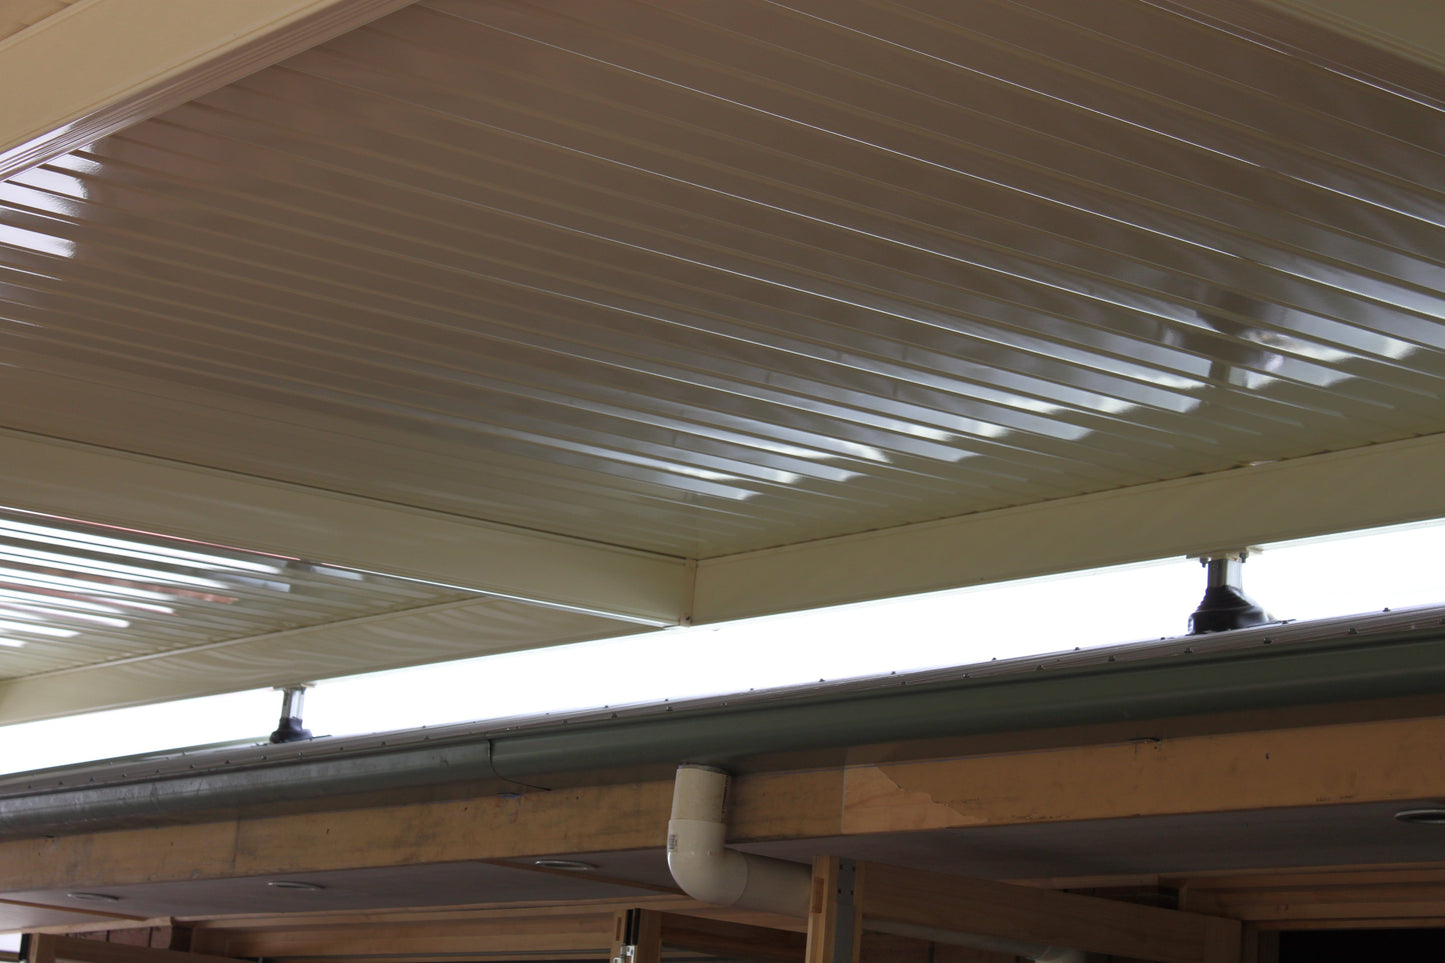 Insulated Flyover Patio Roof-15m x 8m- Supply & Install QHI National